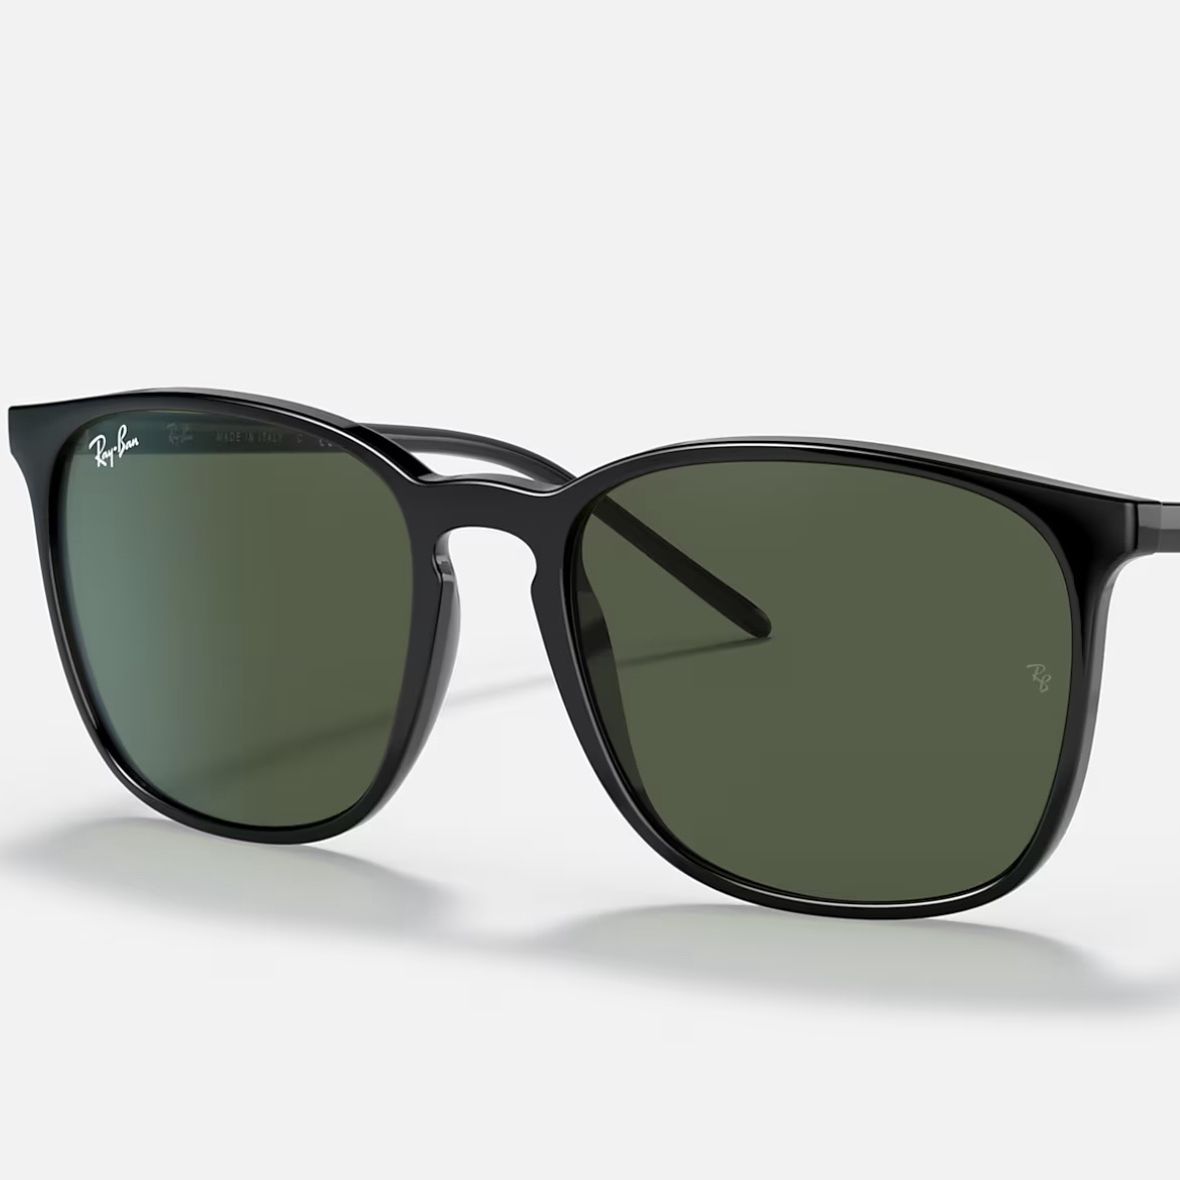 100% Authentic Ray Ban Sunglasses